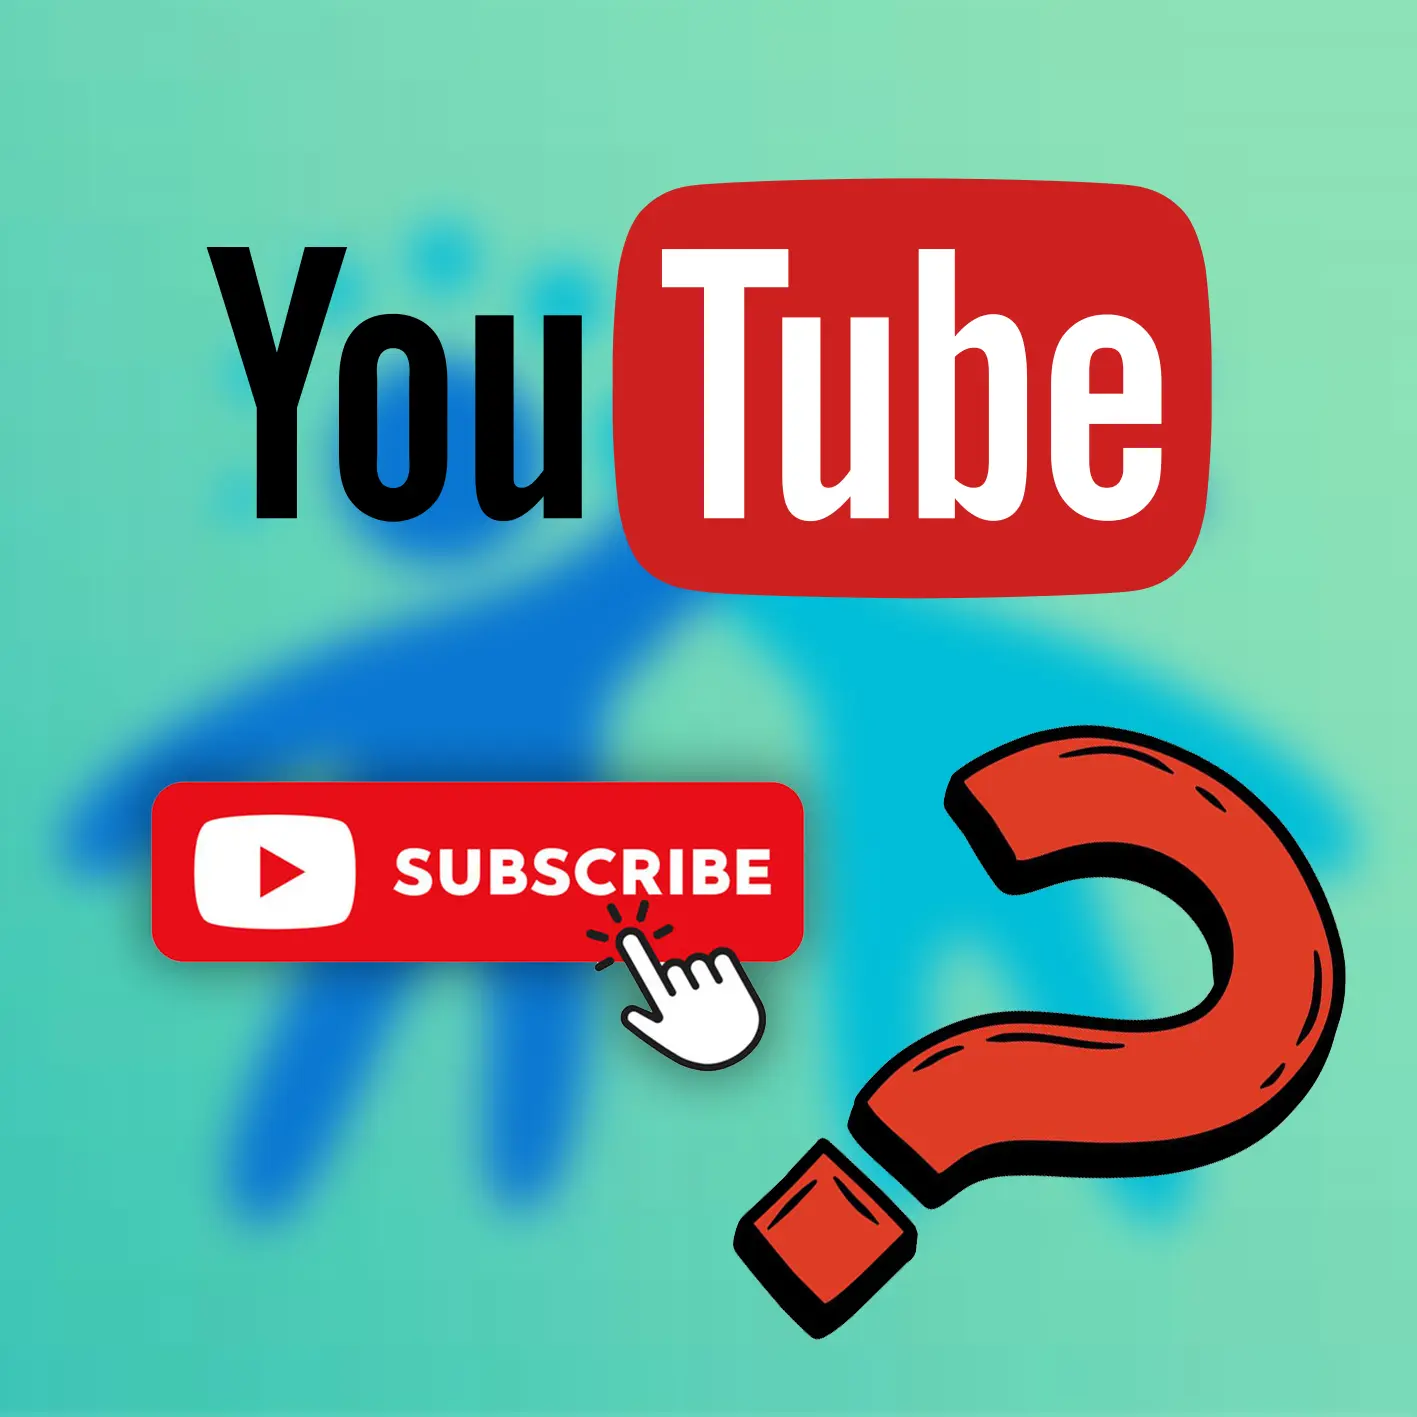 Reasons for buying YouTube subscriptions and visiting YouTube